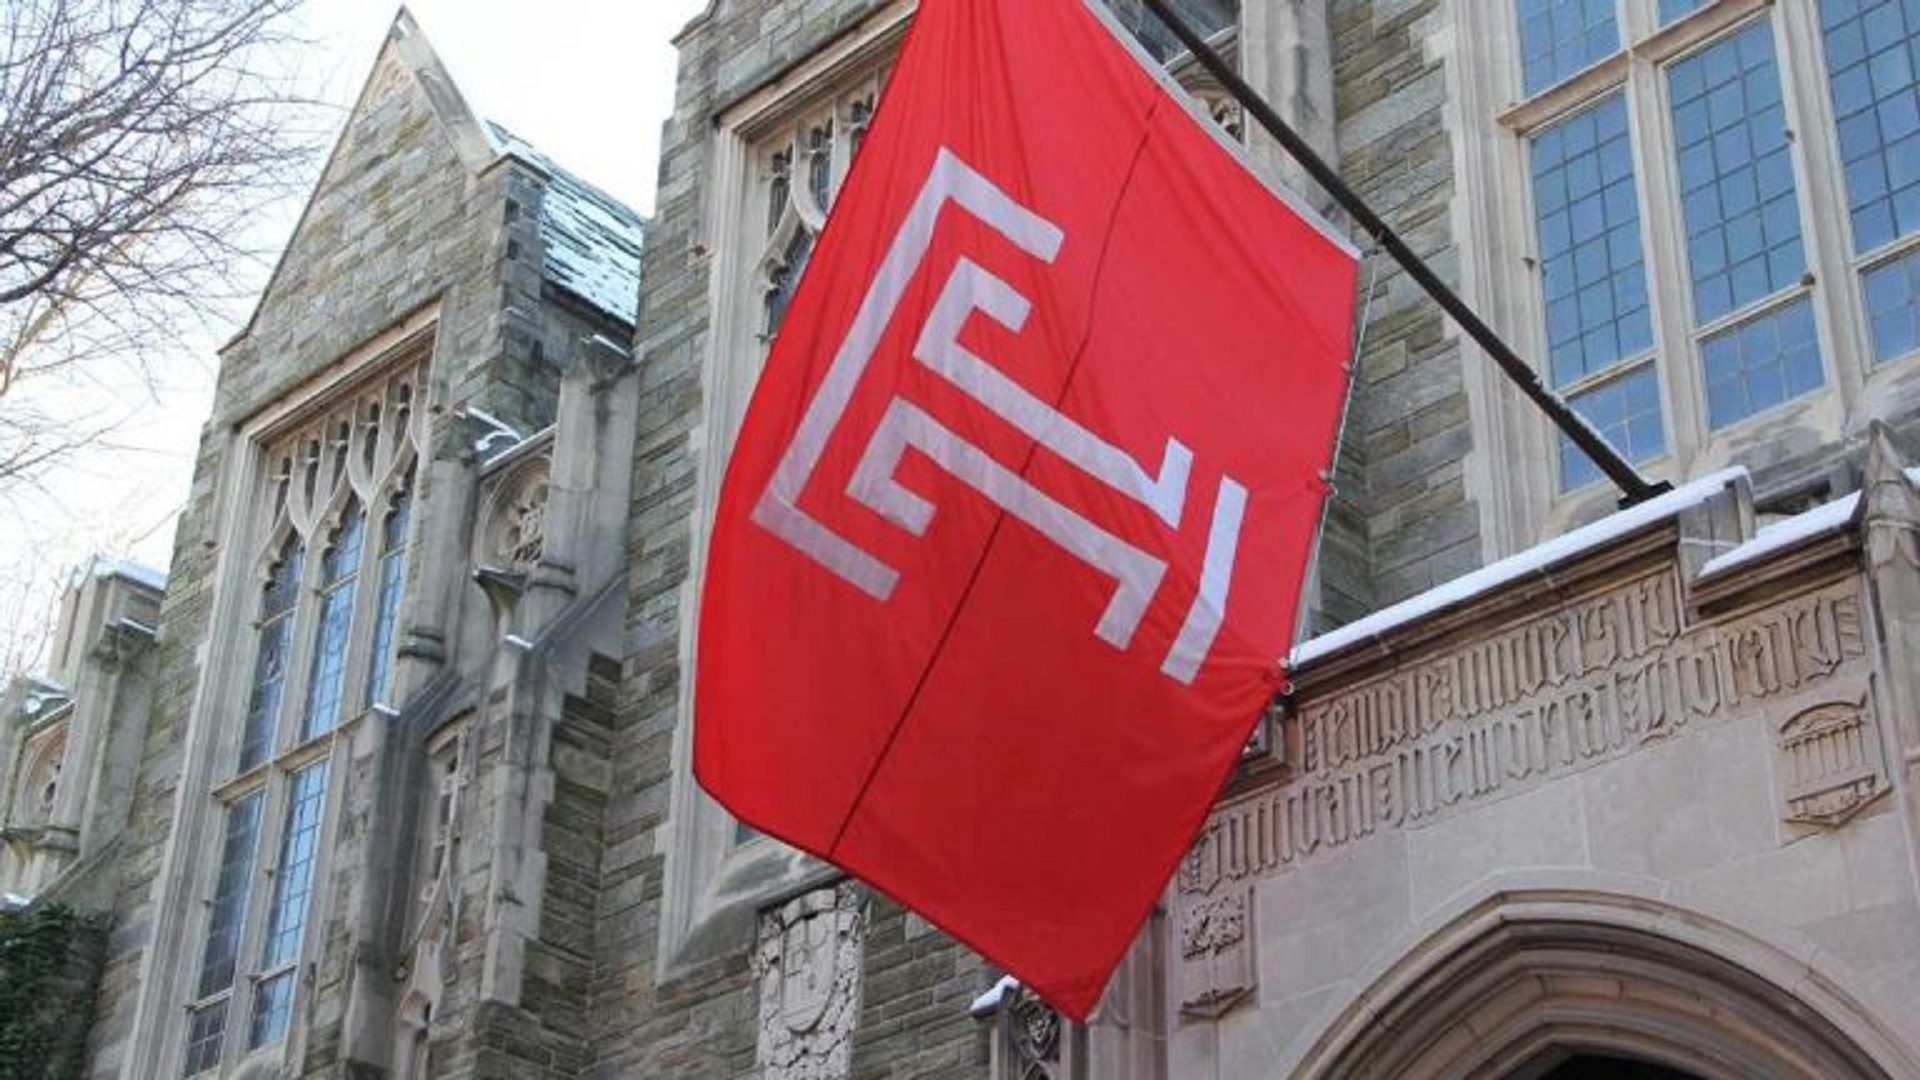 FILE: A flag hangs on campus at Temple University.